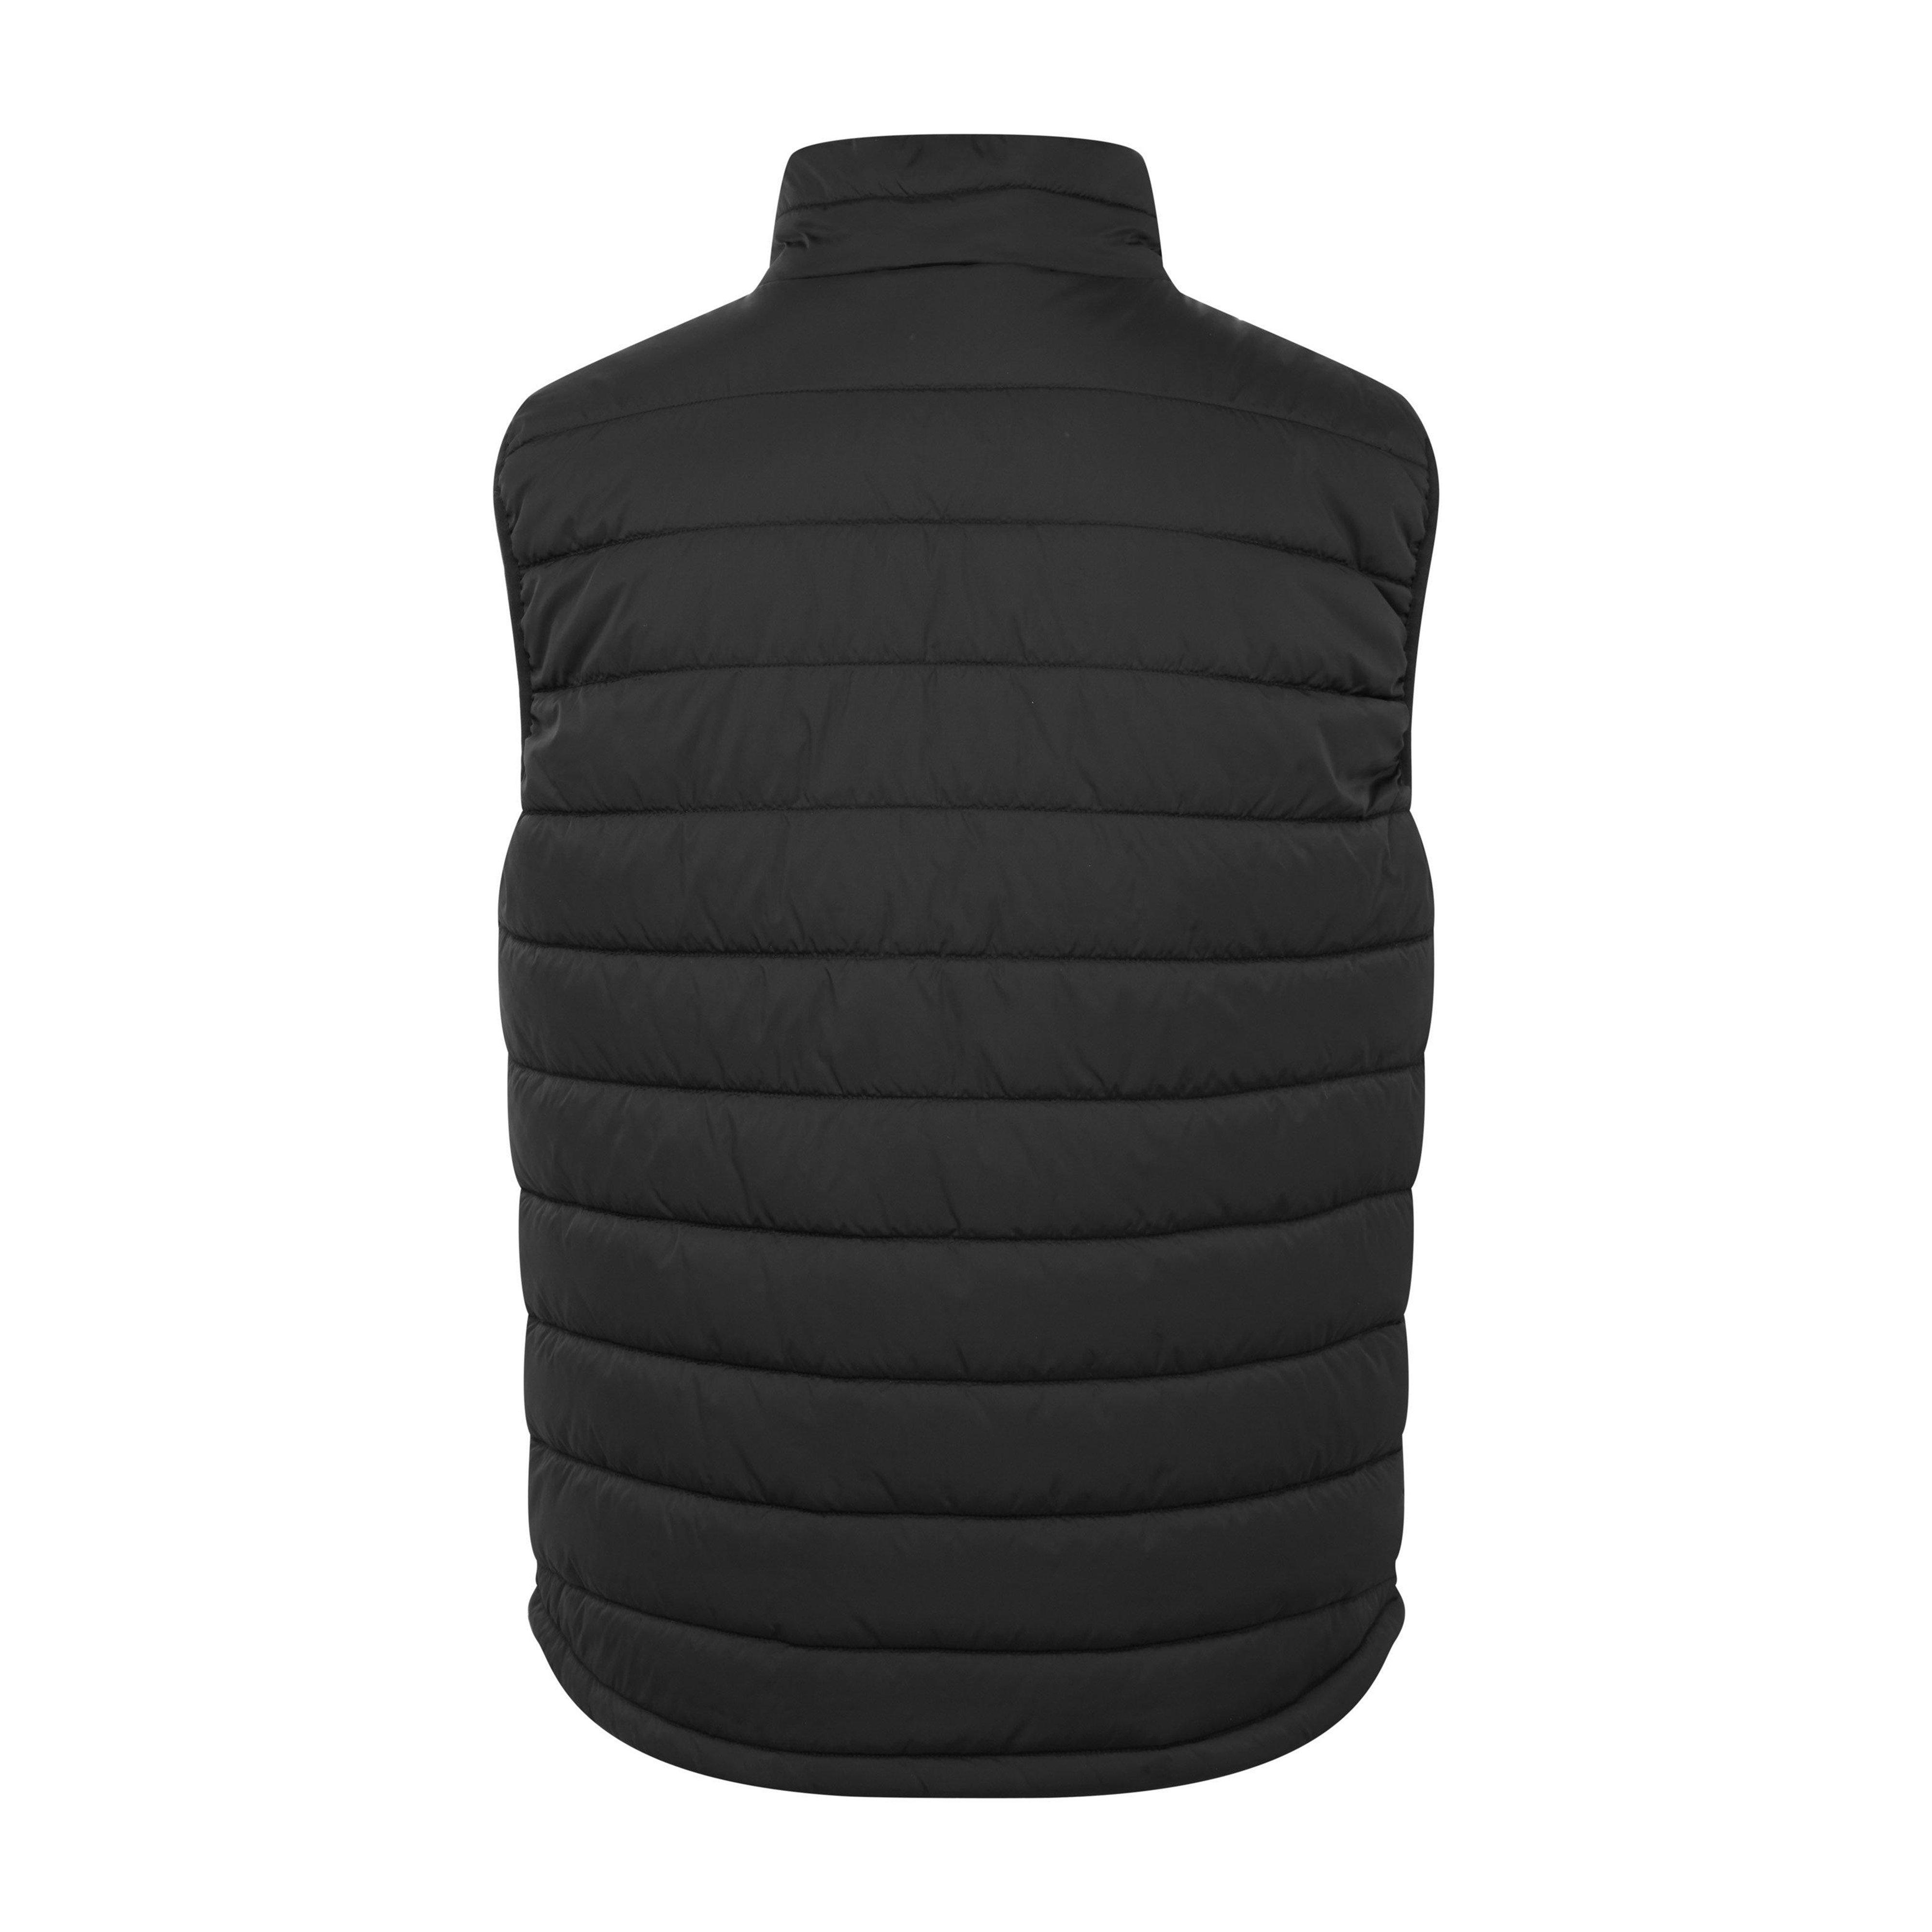 FreedomTrail Men's Blisco Insulated Gilet Review